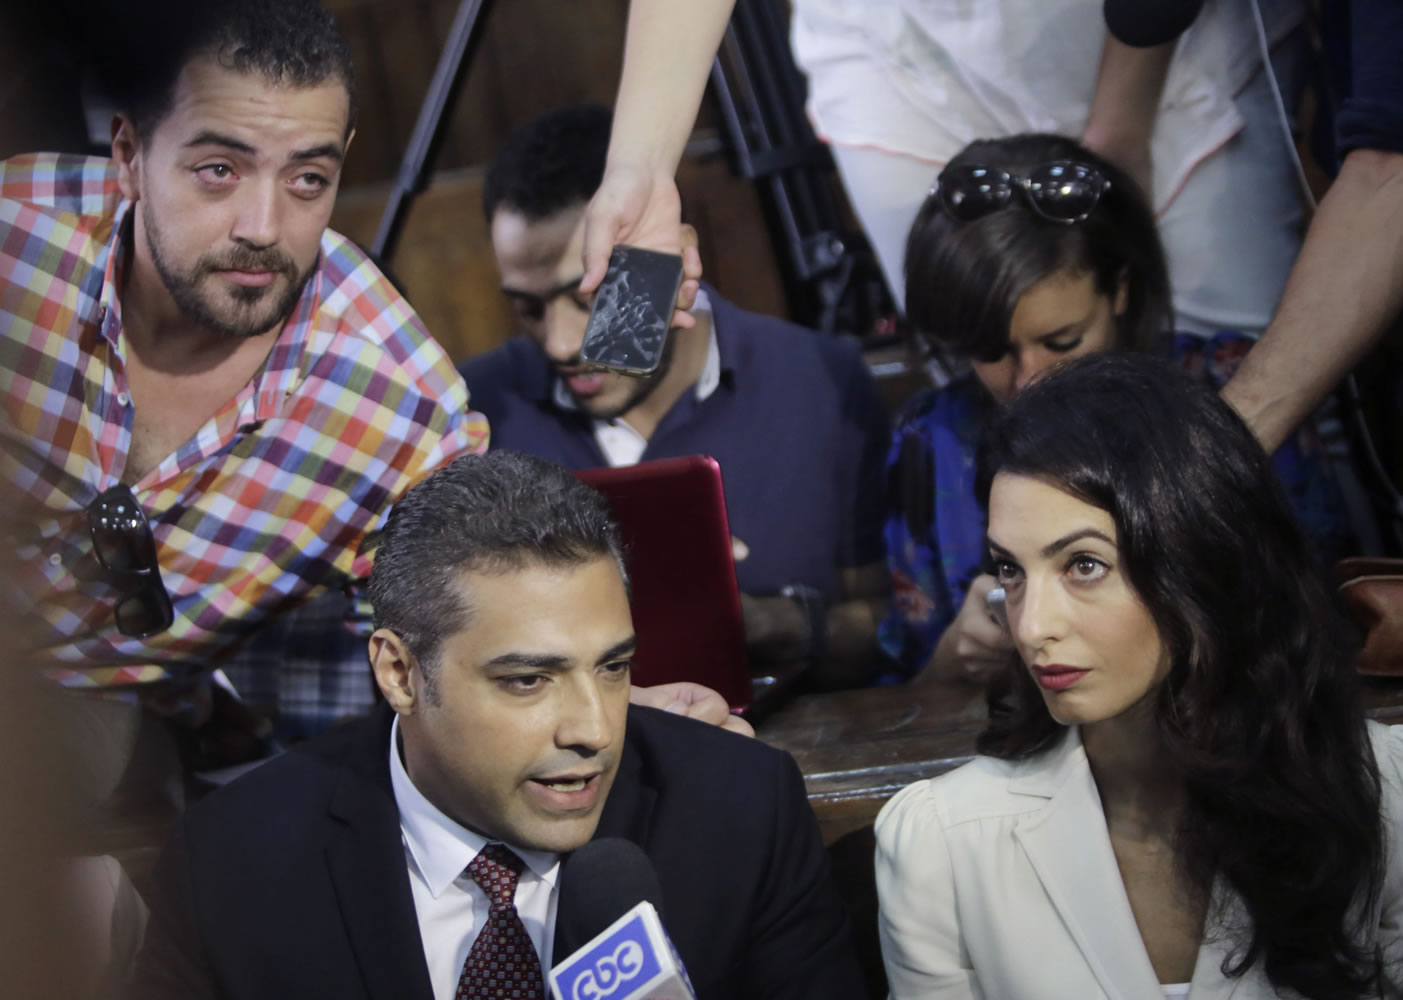 Canadian Al-Jazeera English journalist Mohammed Fahmy, left, his lawyer Amal Clooney and his Egyptian colleague Baher Mohammed, at top left, speak to media before their verdict in a courtroom in Tora prison in Cairo, Egypt, Saturday, Aug. 29, 2015. An Egyptian court on Saturday sentenced three Al-Jazeera English journalists to three years in prison, the last twist in a long-running trial criticized worldwide by press freedom advocates and human rights activists.